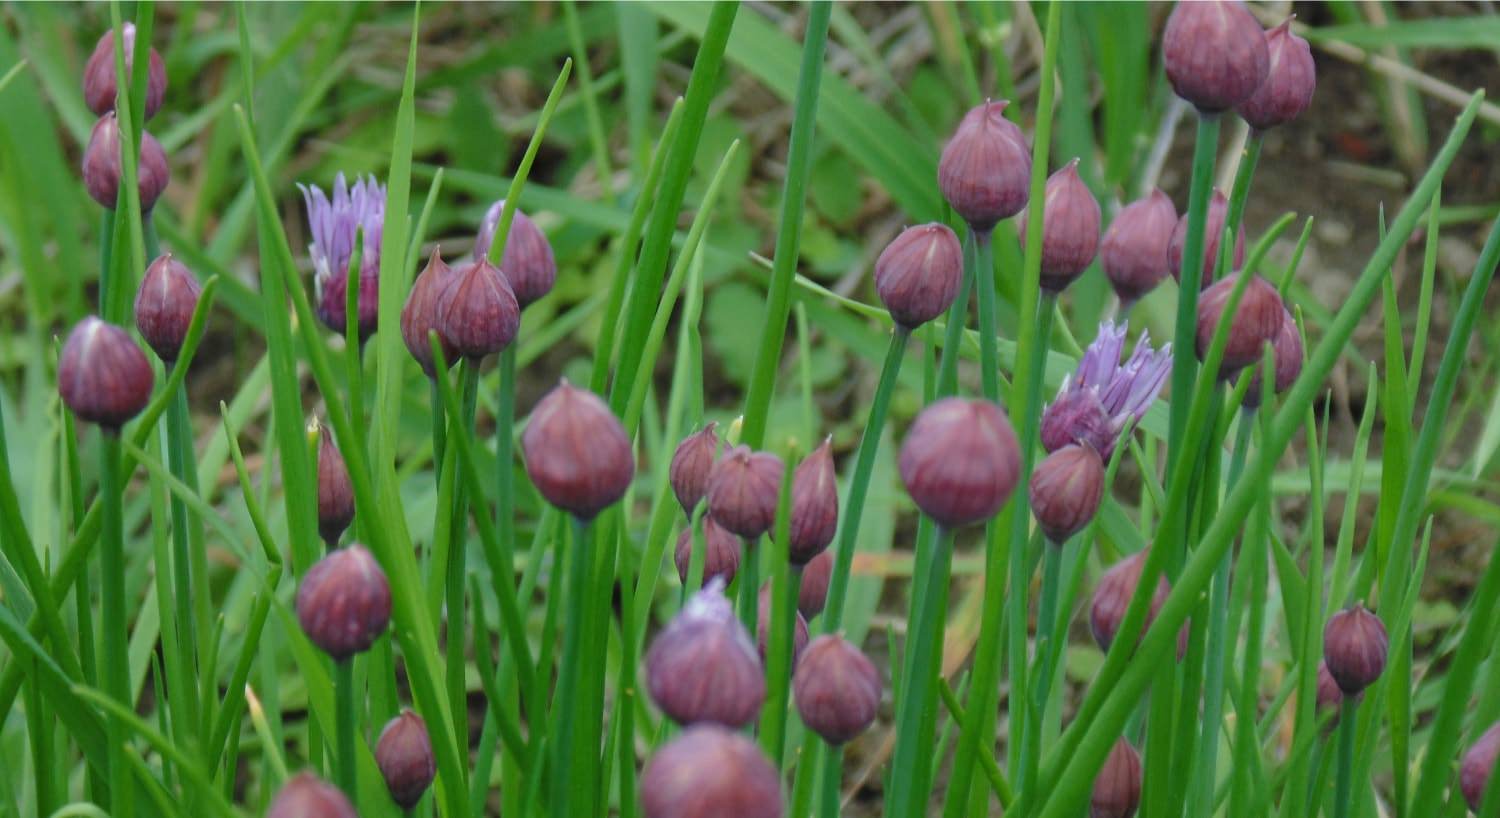 Close up view of purple flower buds in tall green grass